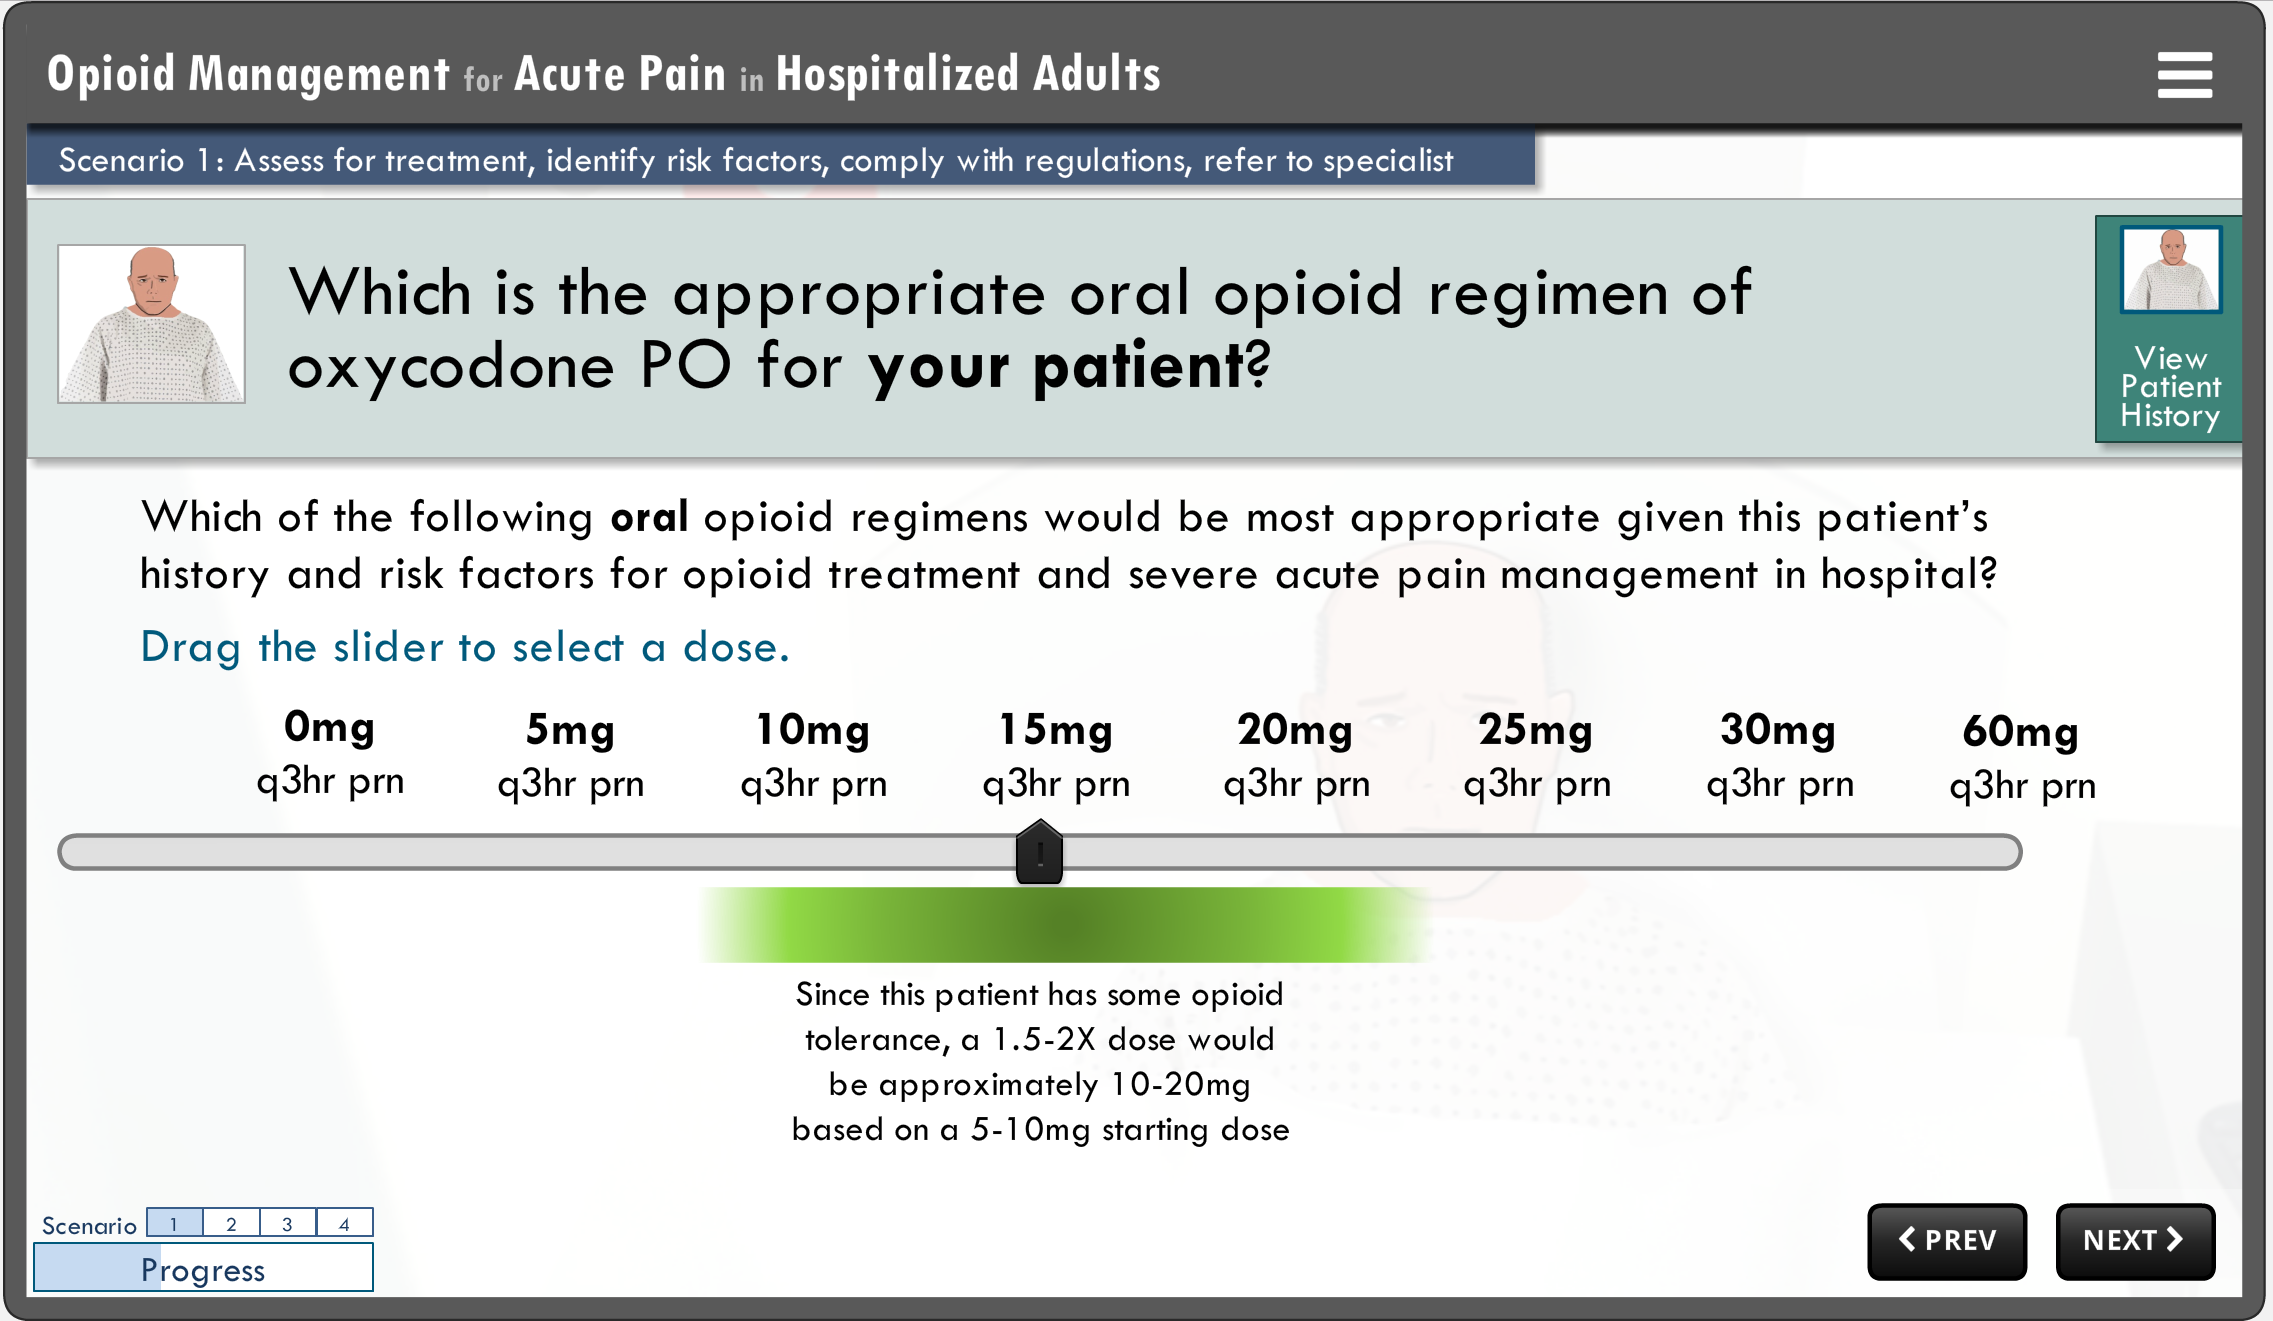 Slider activity for choosing the starting dose of Oxycodone PO for a patient